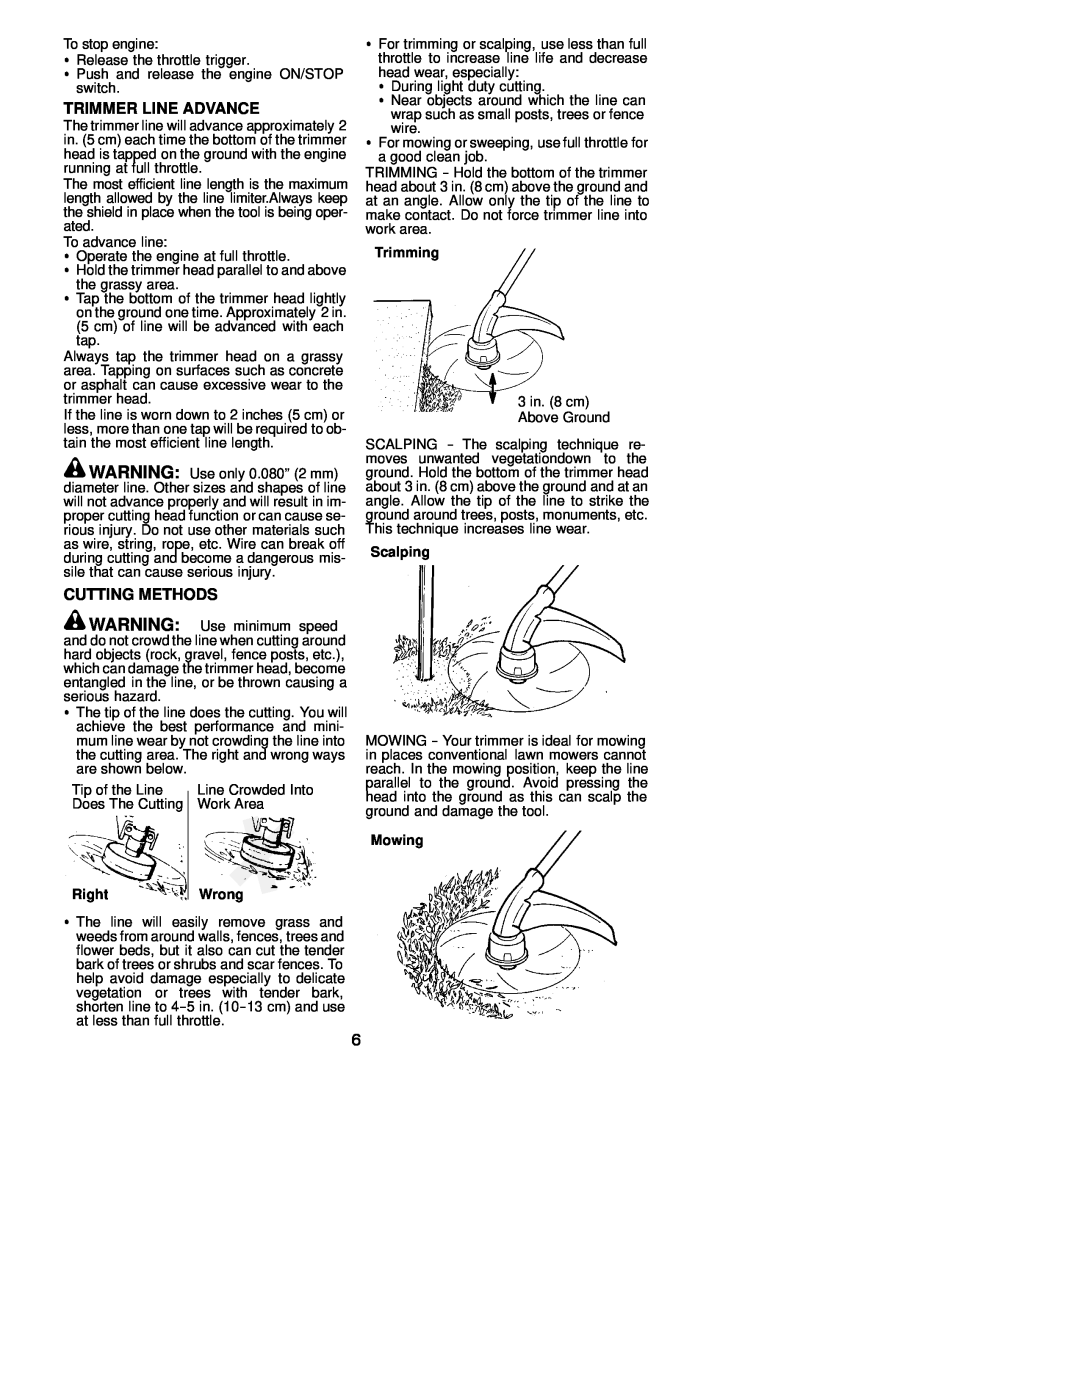 Weed Eater 530163448 instruction manual Trimmer Line Advance, Cutting Methods, Trimming, Scalping, Right, Mowing 